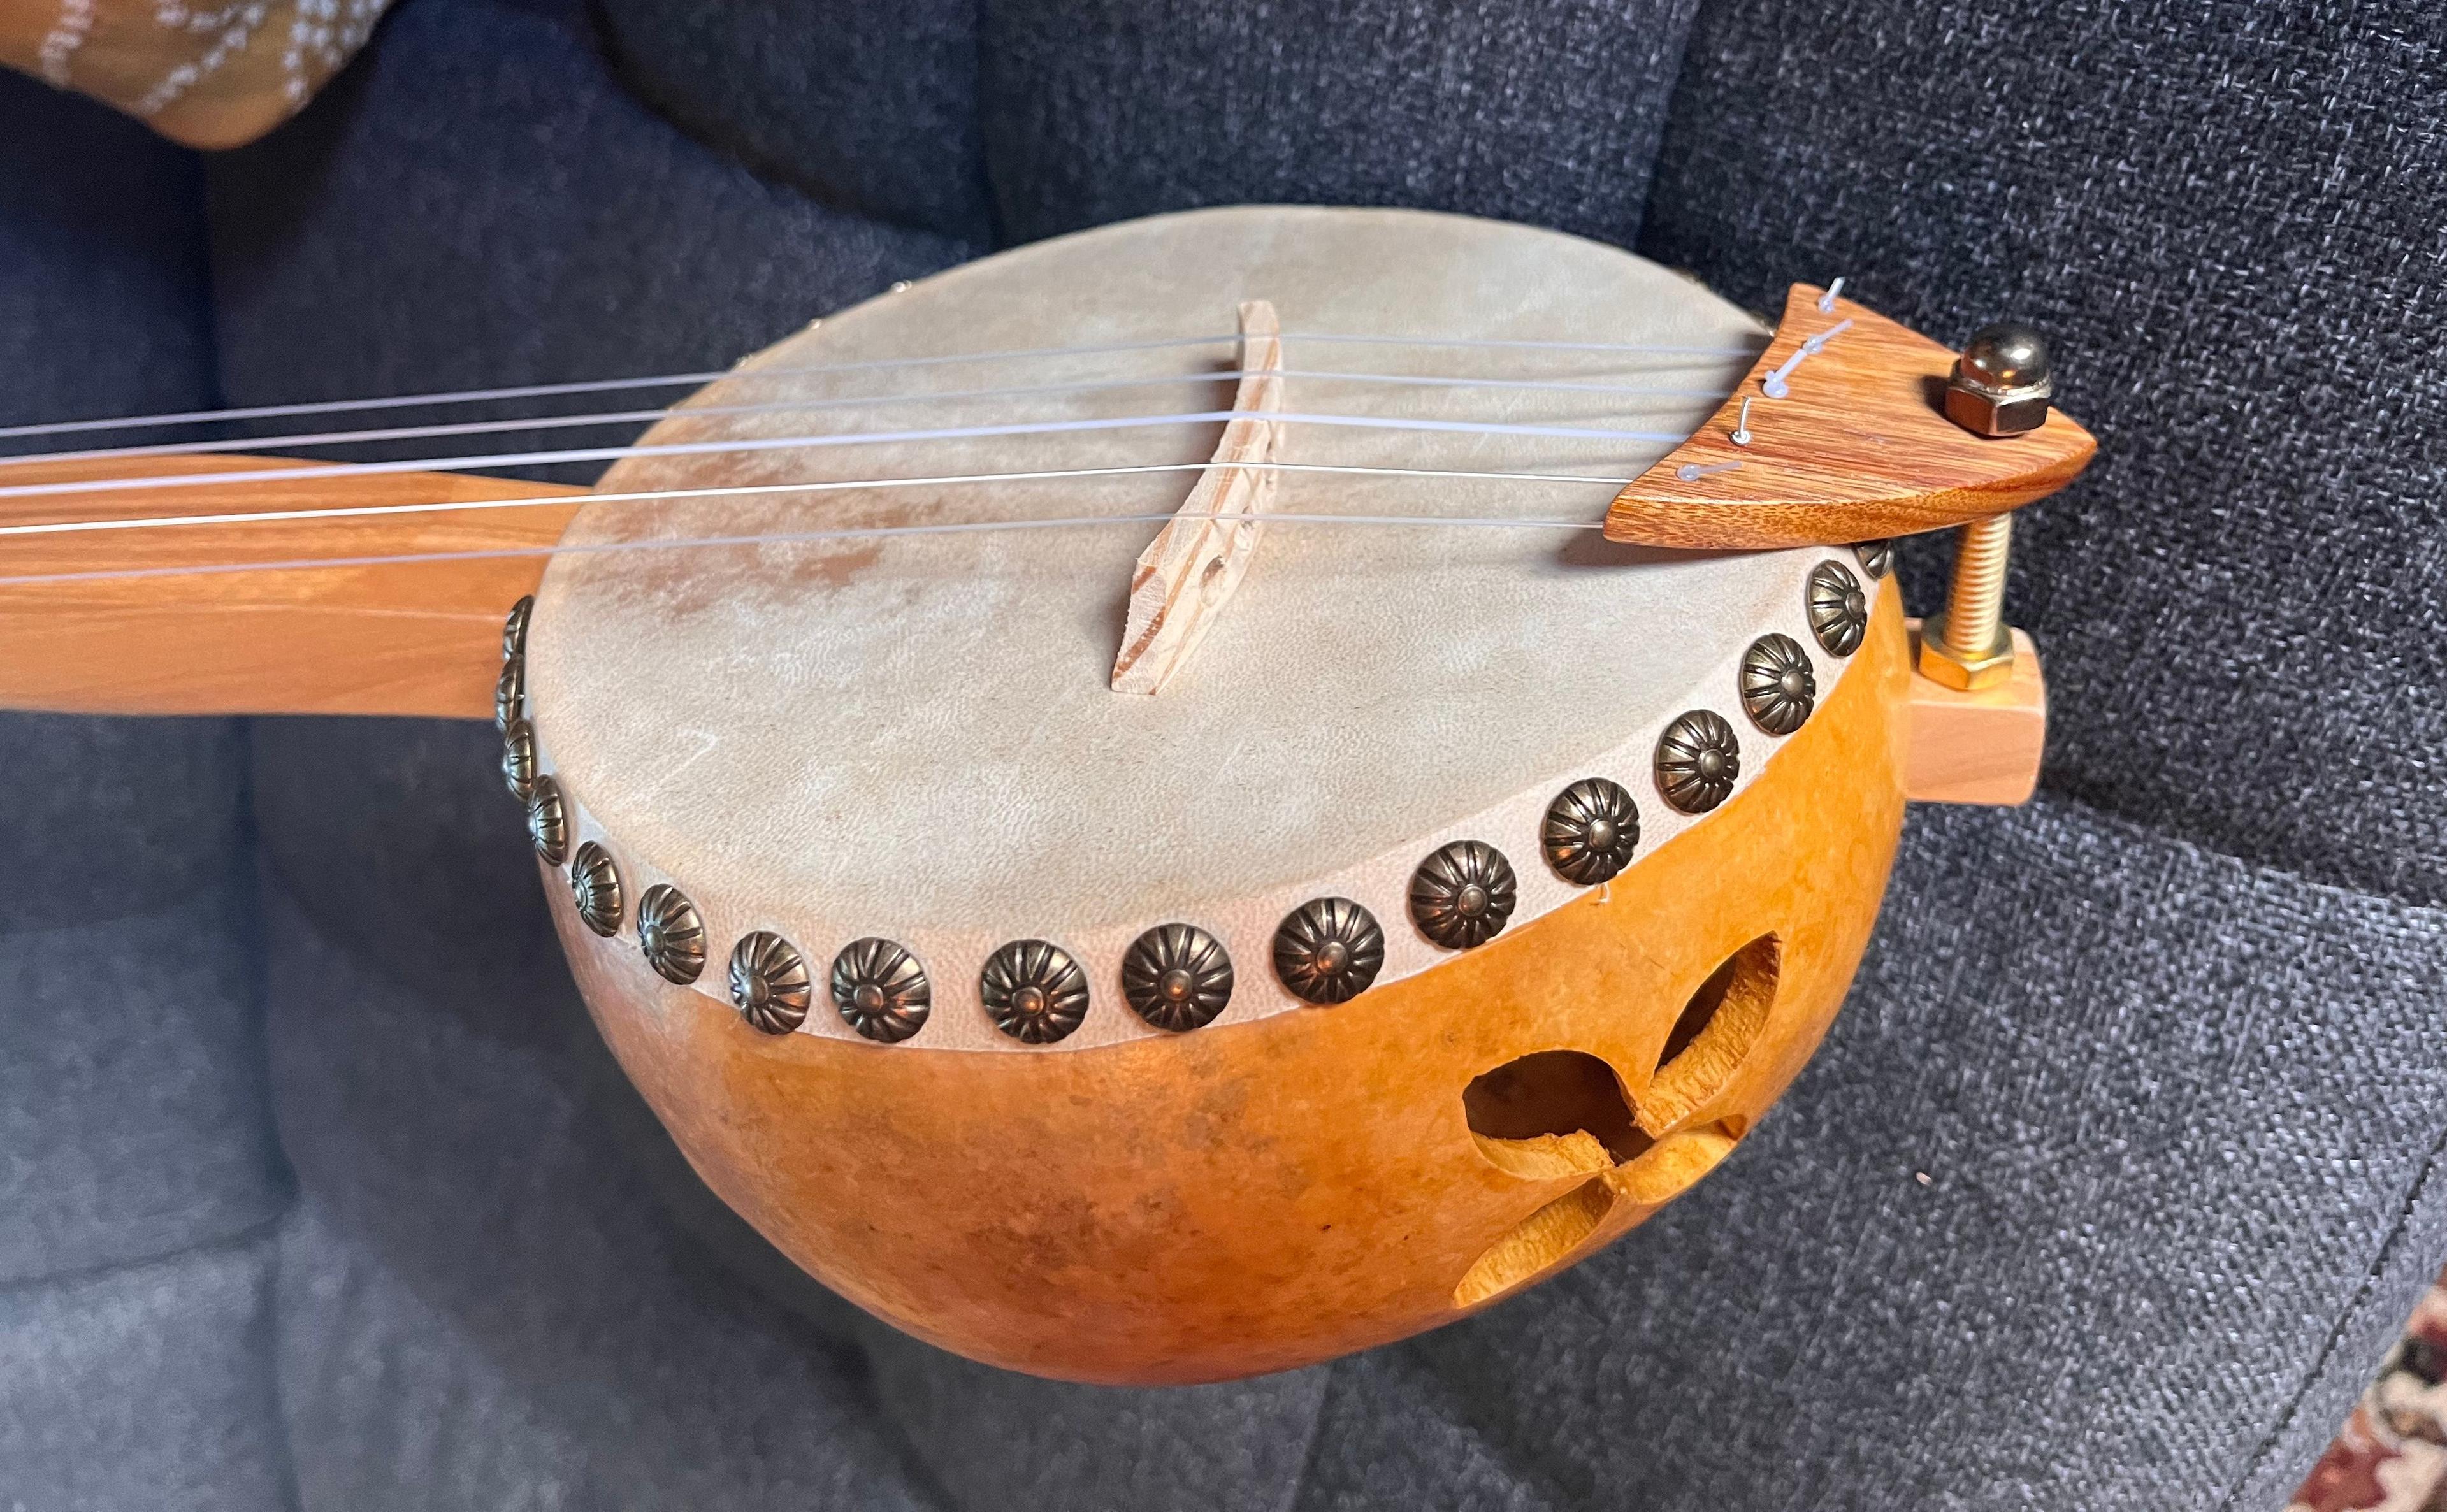 View of the side of the gourd